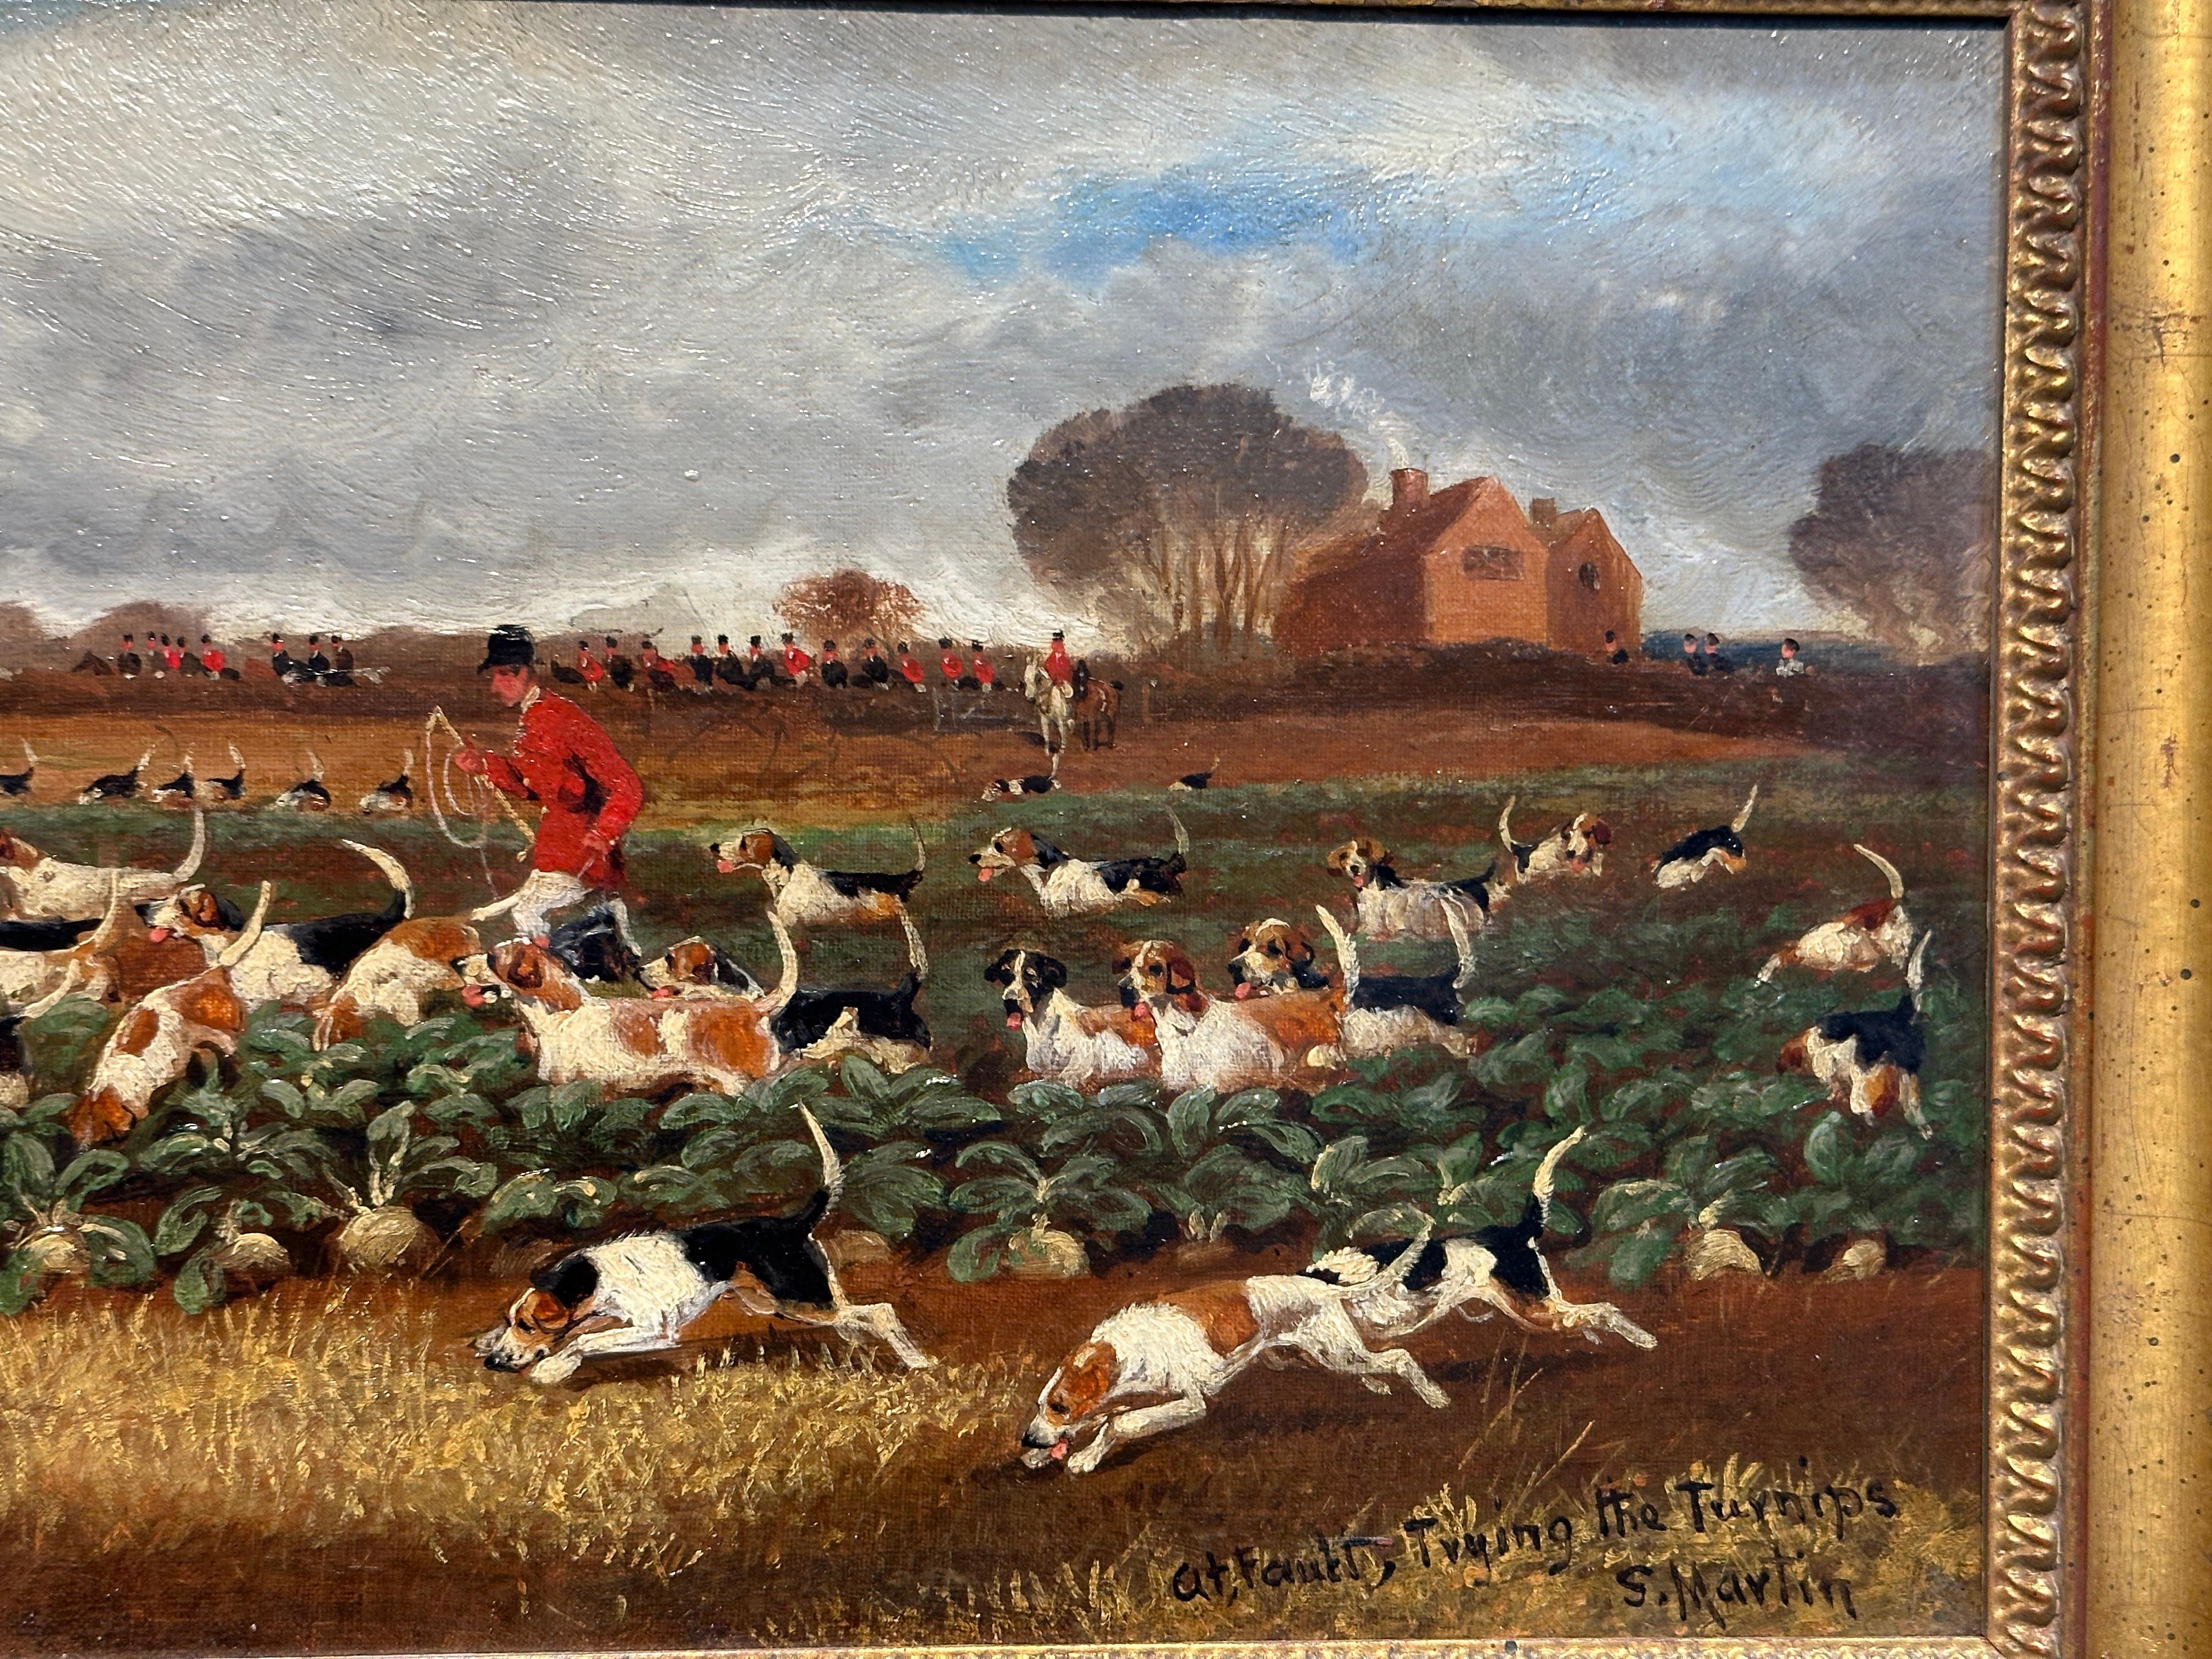 Sylvester Martin was a highly respected English sporting and animal painter from the latter part of the 19th century. 
He mostly painted fox hunting scenes with a great deal of detail and skill. Each animal is well observed and painted to a very